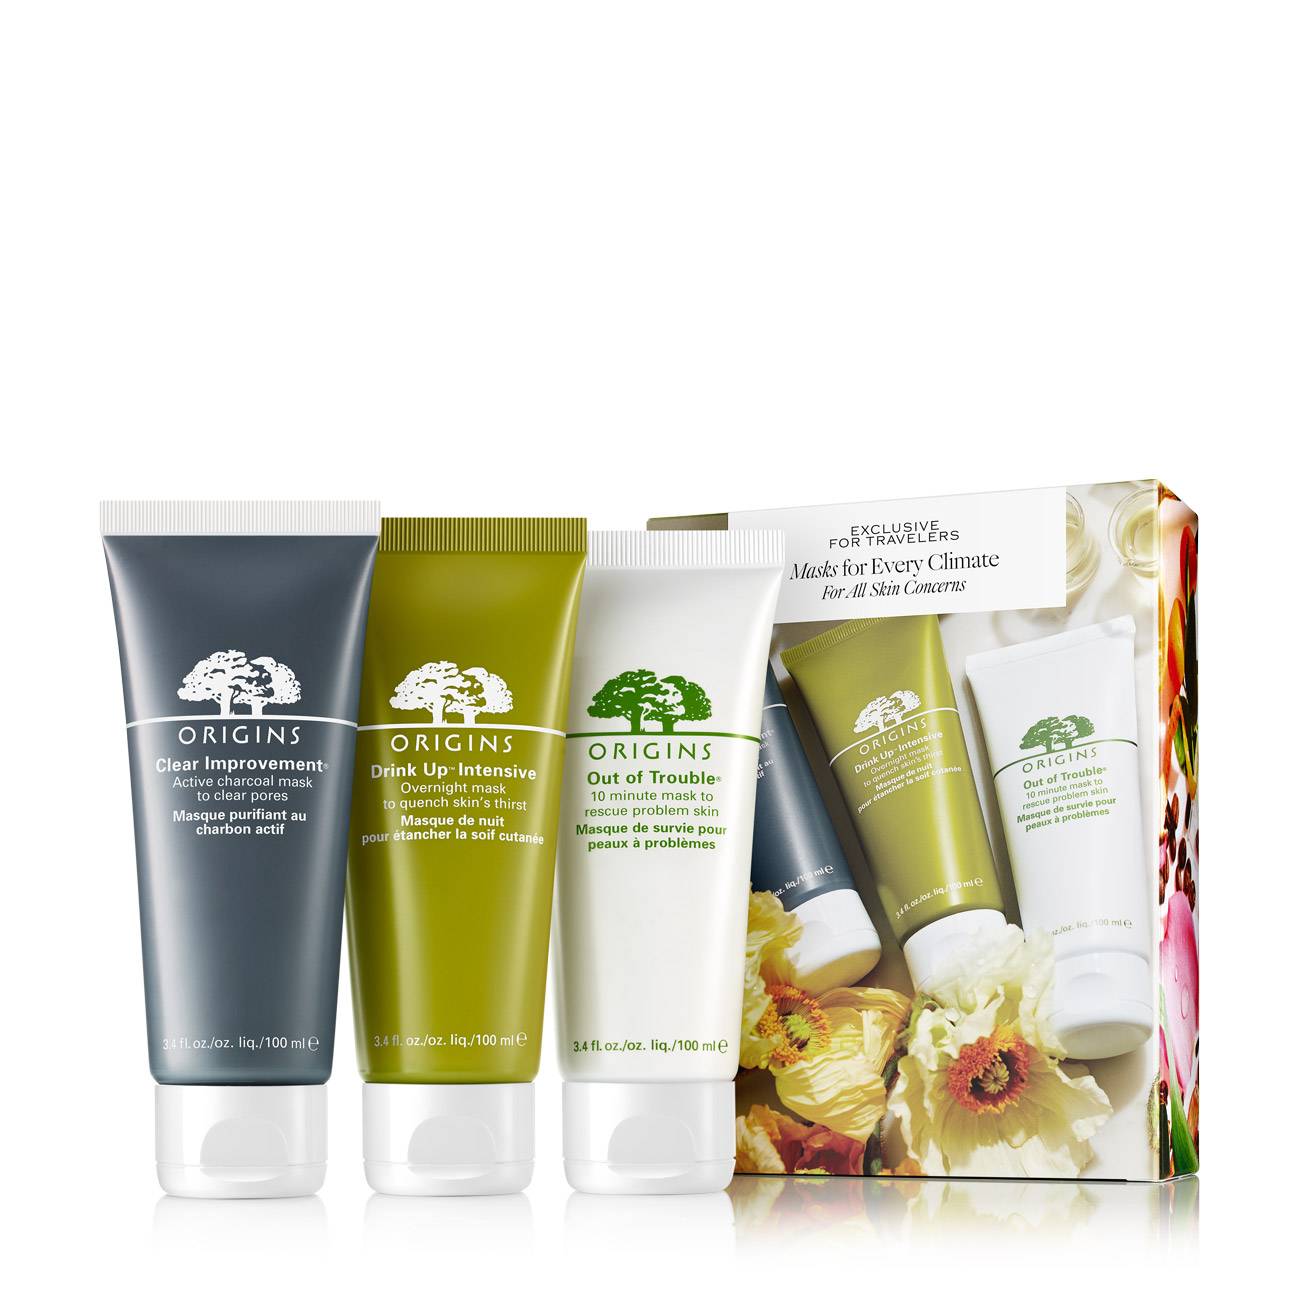 MASKS FOR EVERY CLIMATE – FOR ALL SKIN CONCERNS SET 300 ml 300